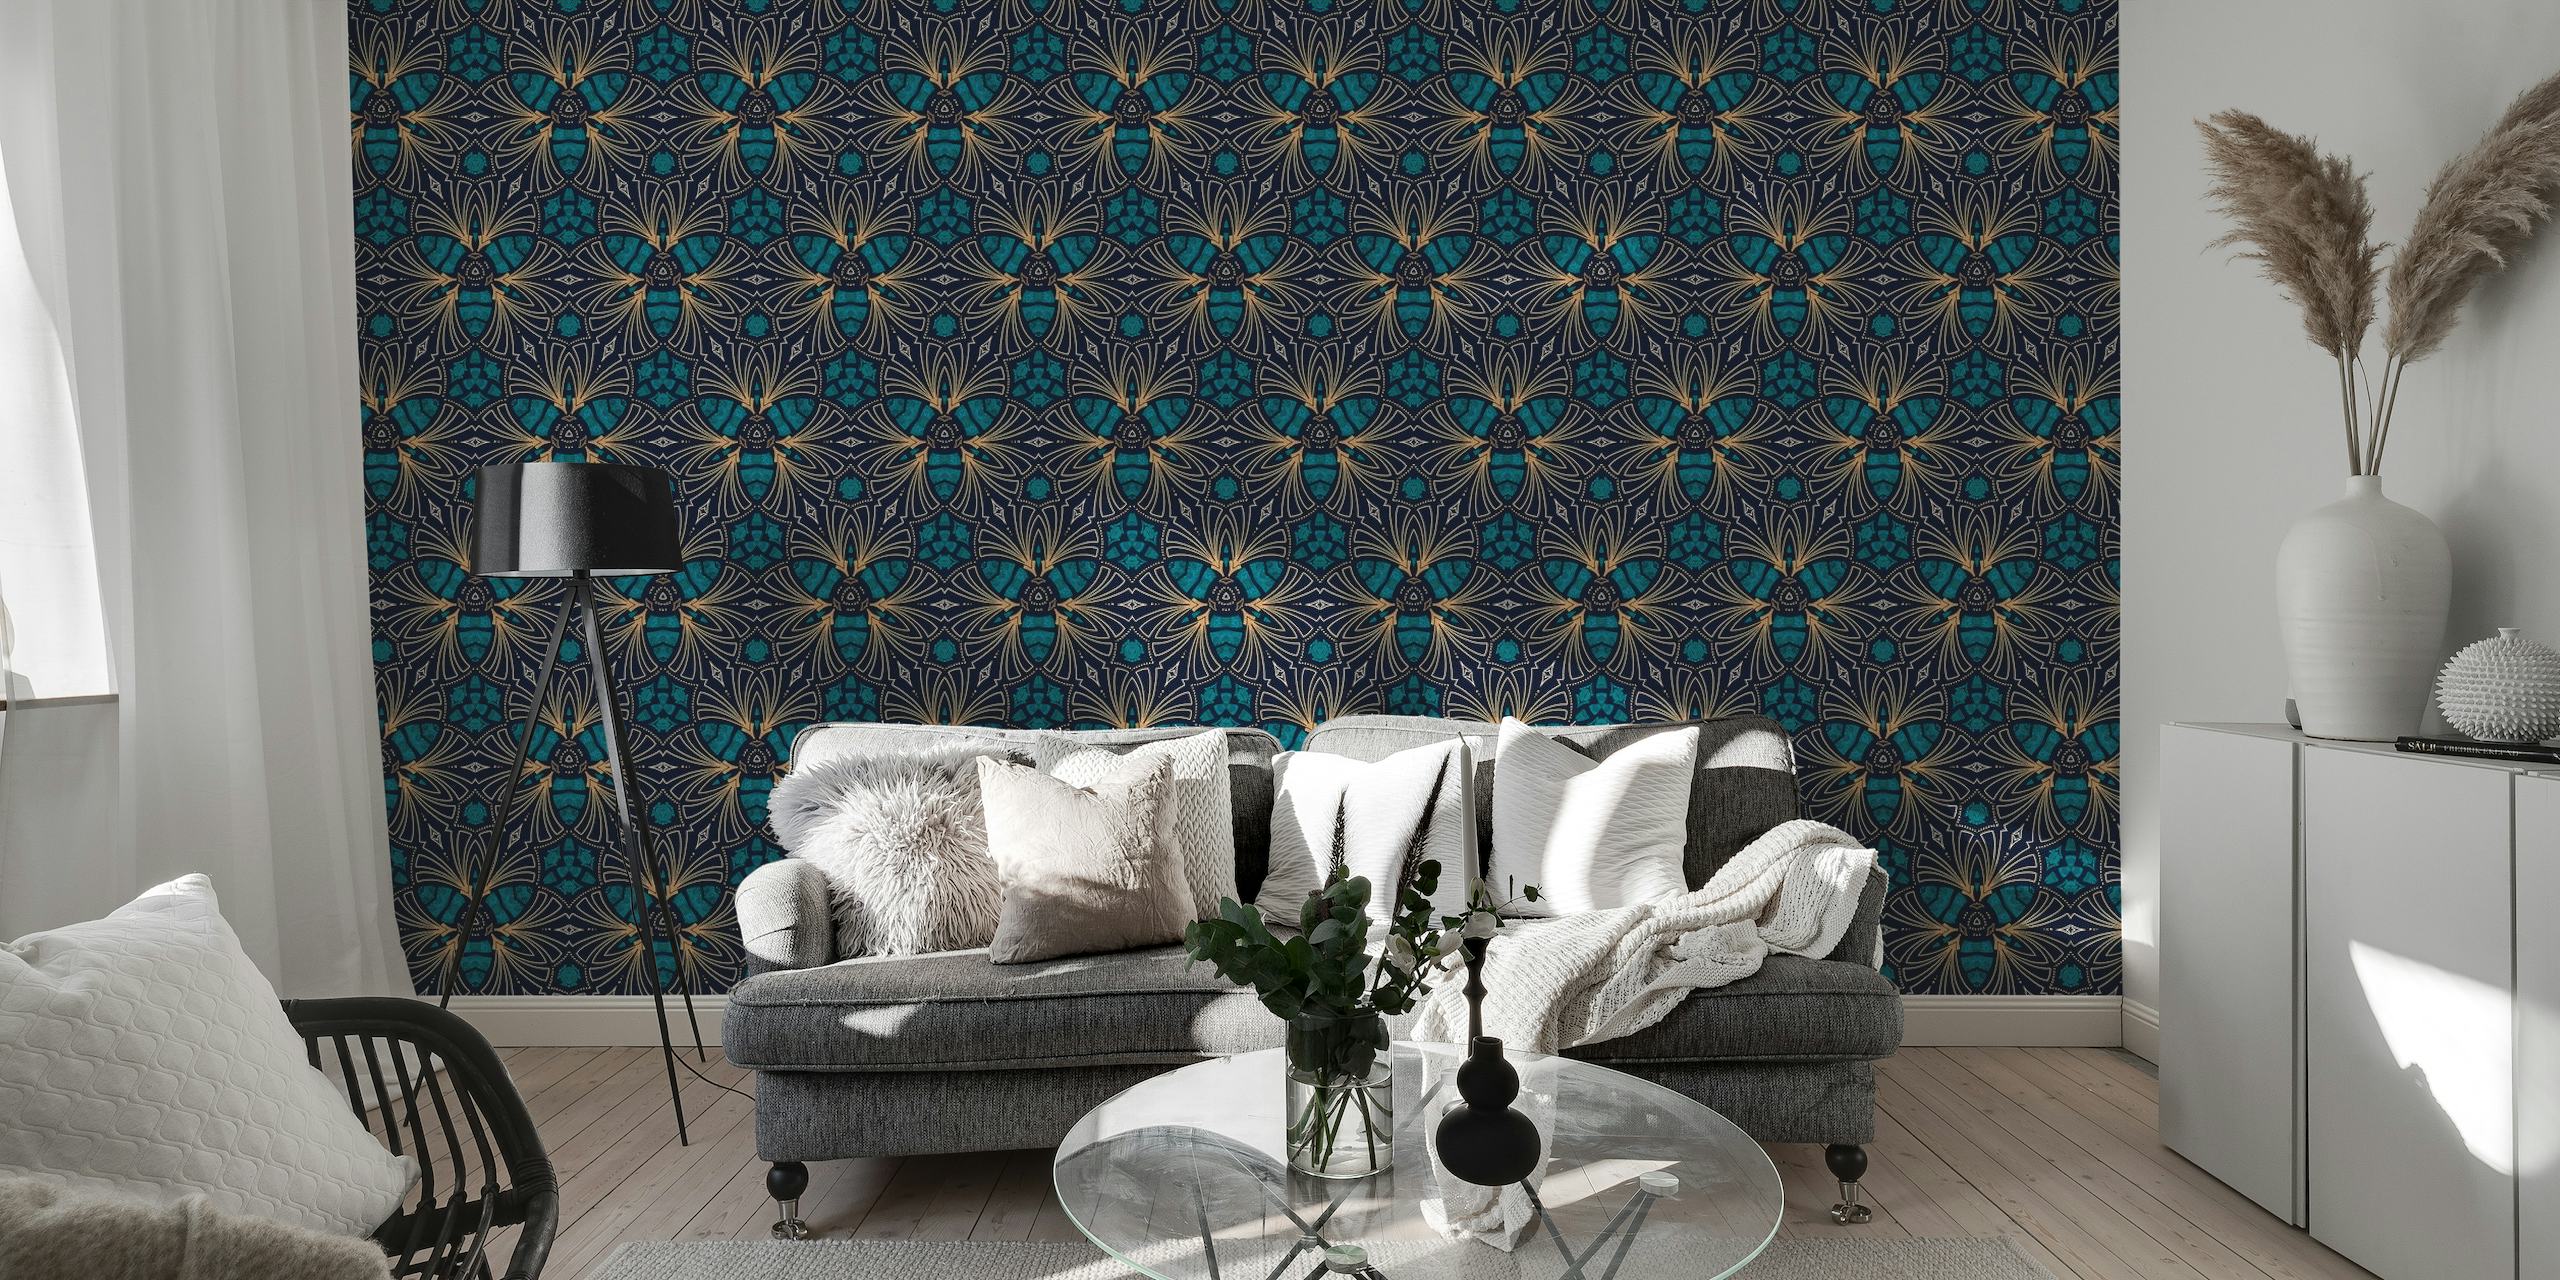 Elegant Art Deco pattern wall mural in gold and teal hues